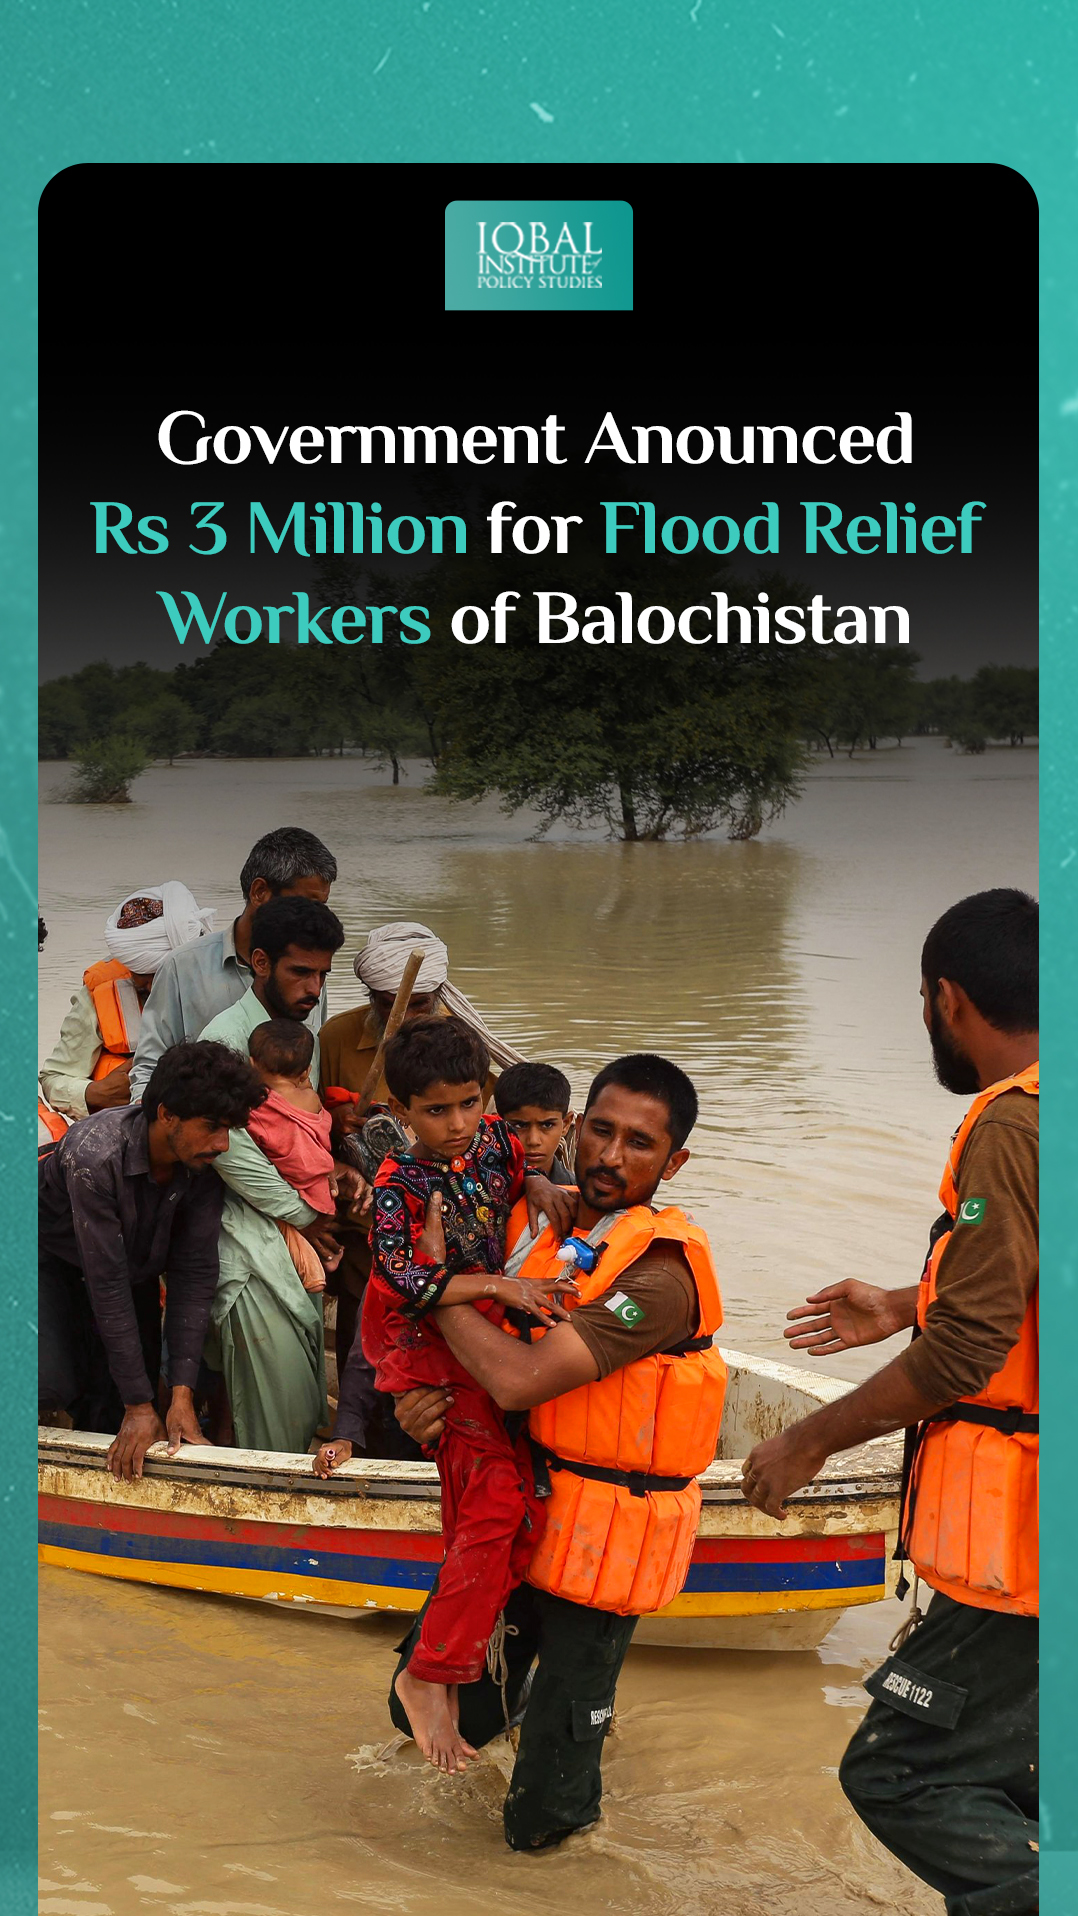 The government announced Rs3 million Flood relief workers in Balochistan